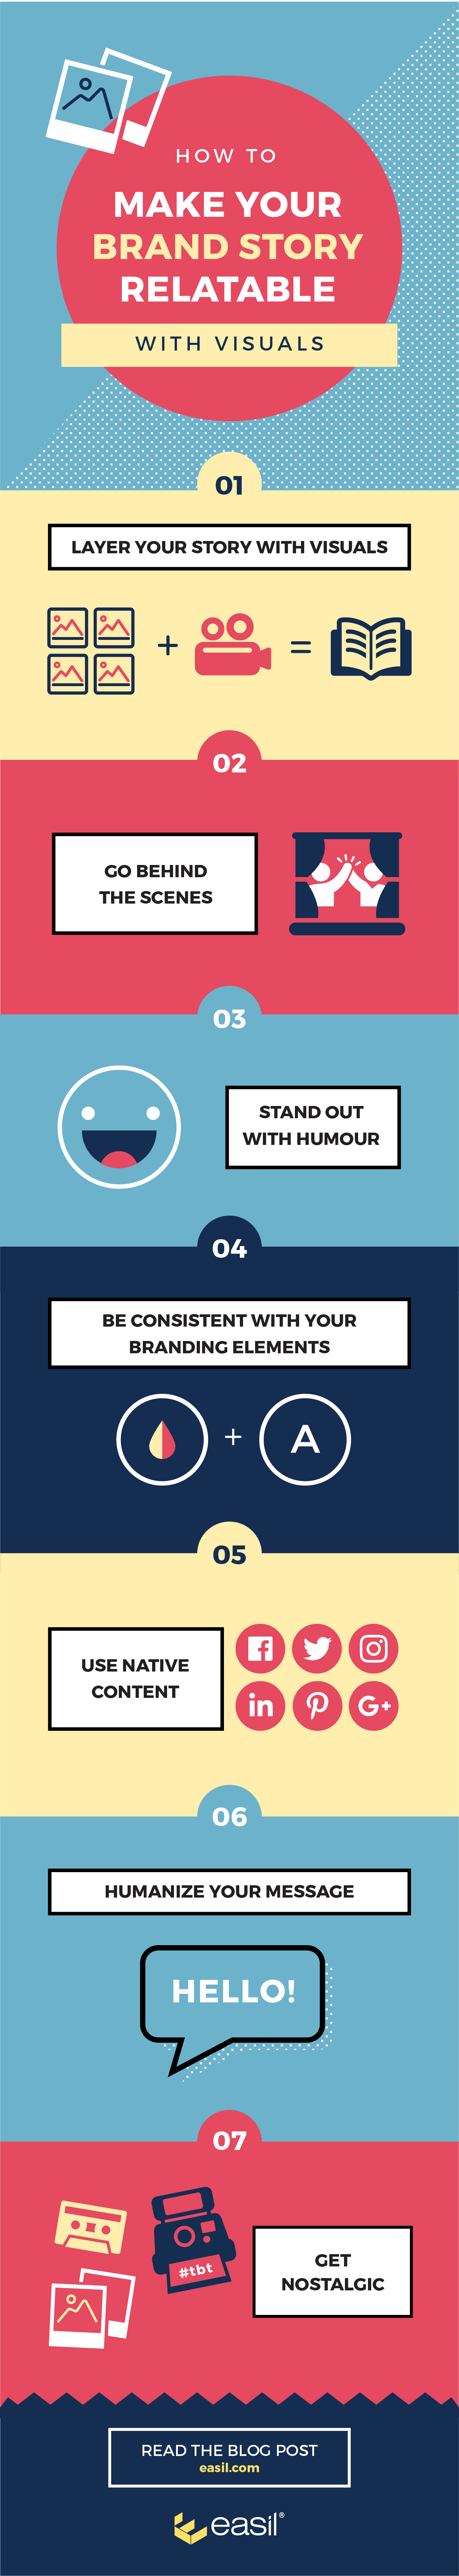 7 tips for making your brand story relatable with graphics infographic